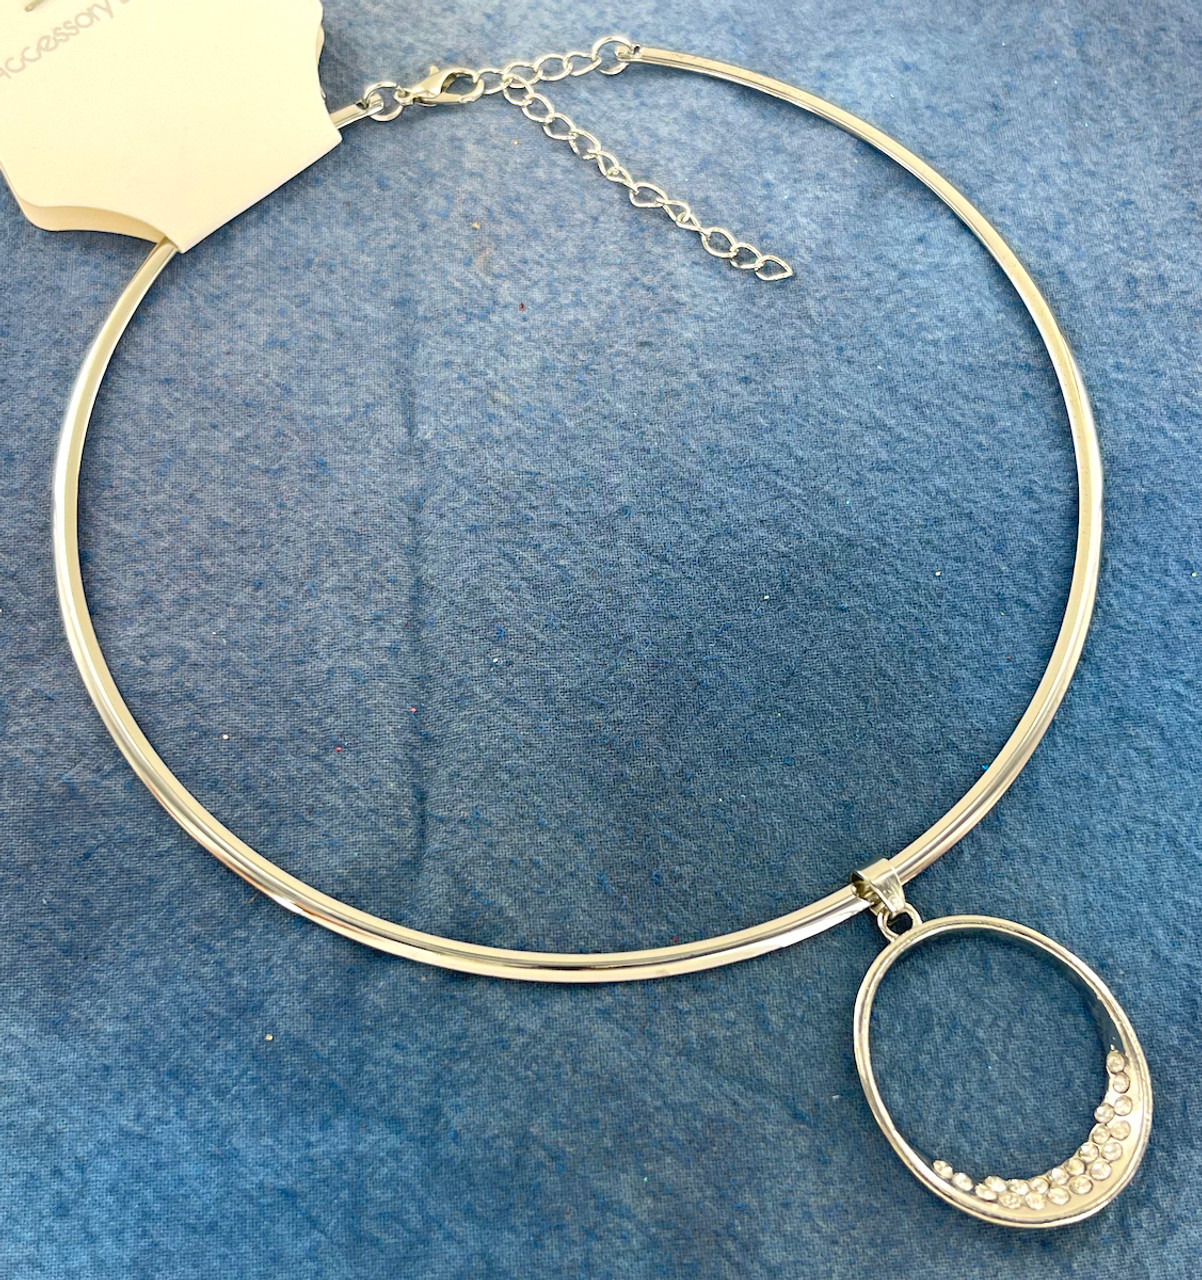 Wholesale Silver Chokers Necklaces by the Dozen